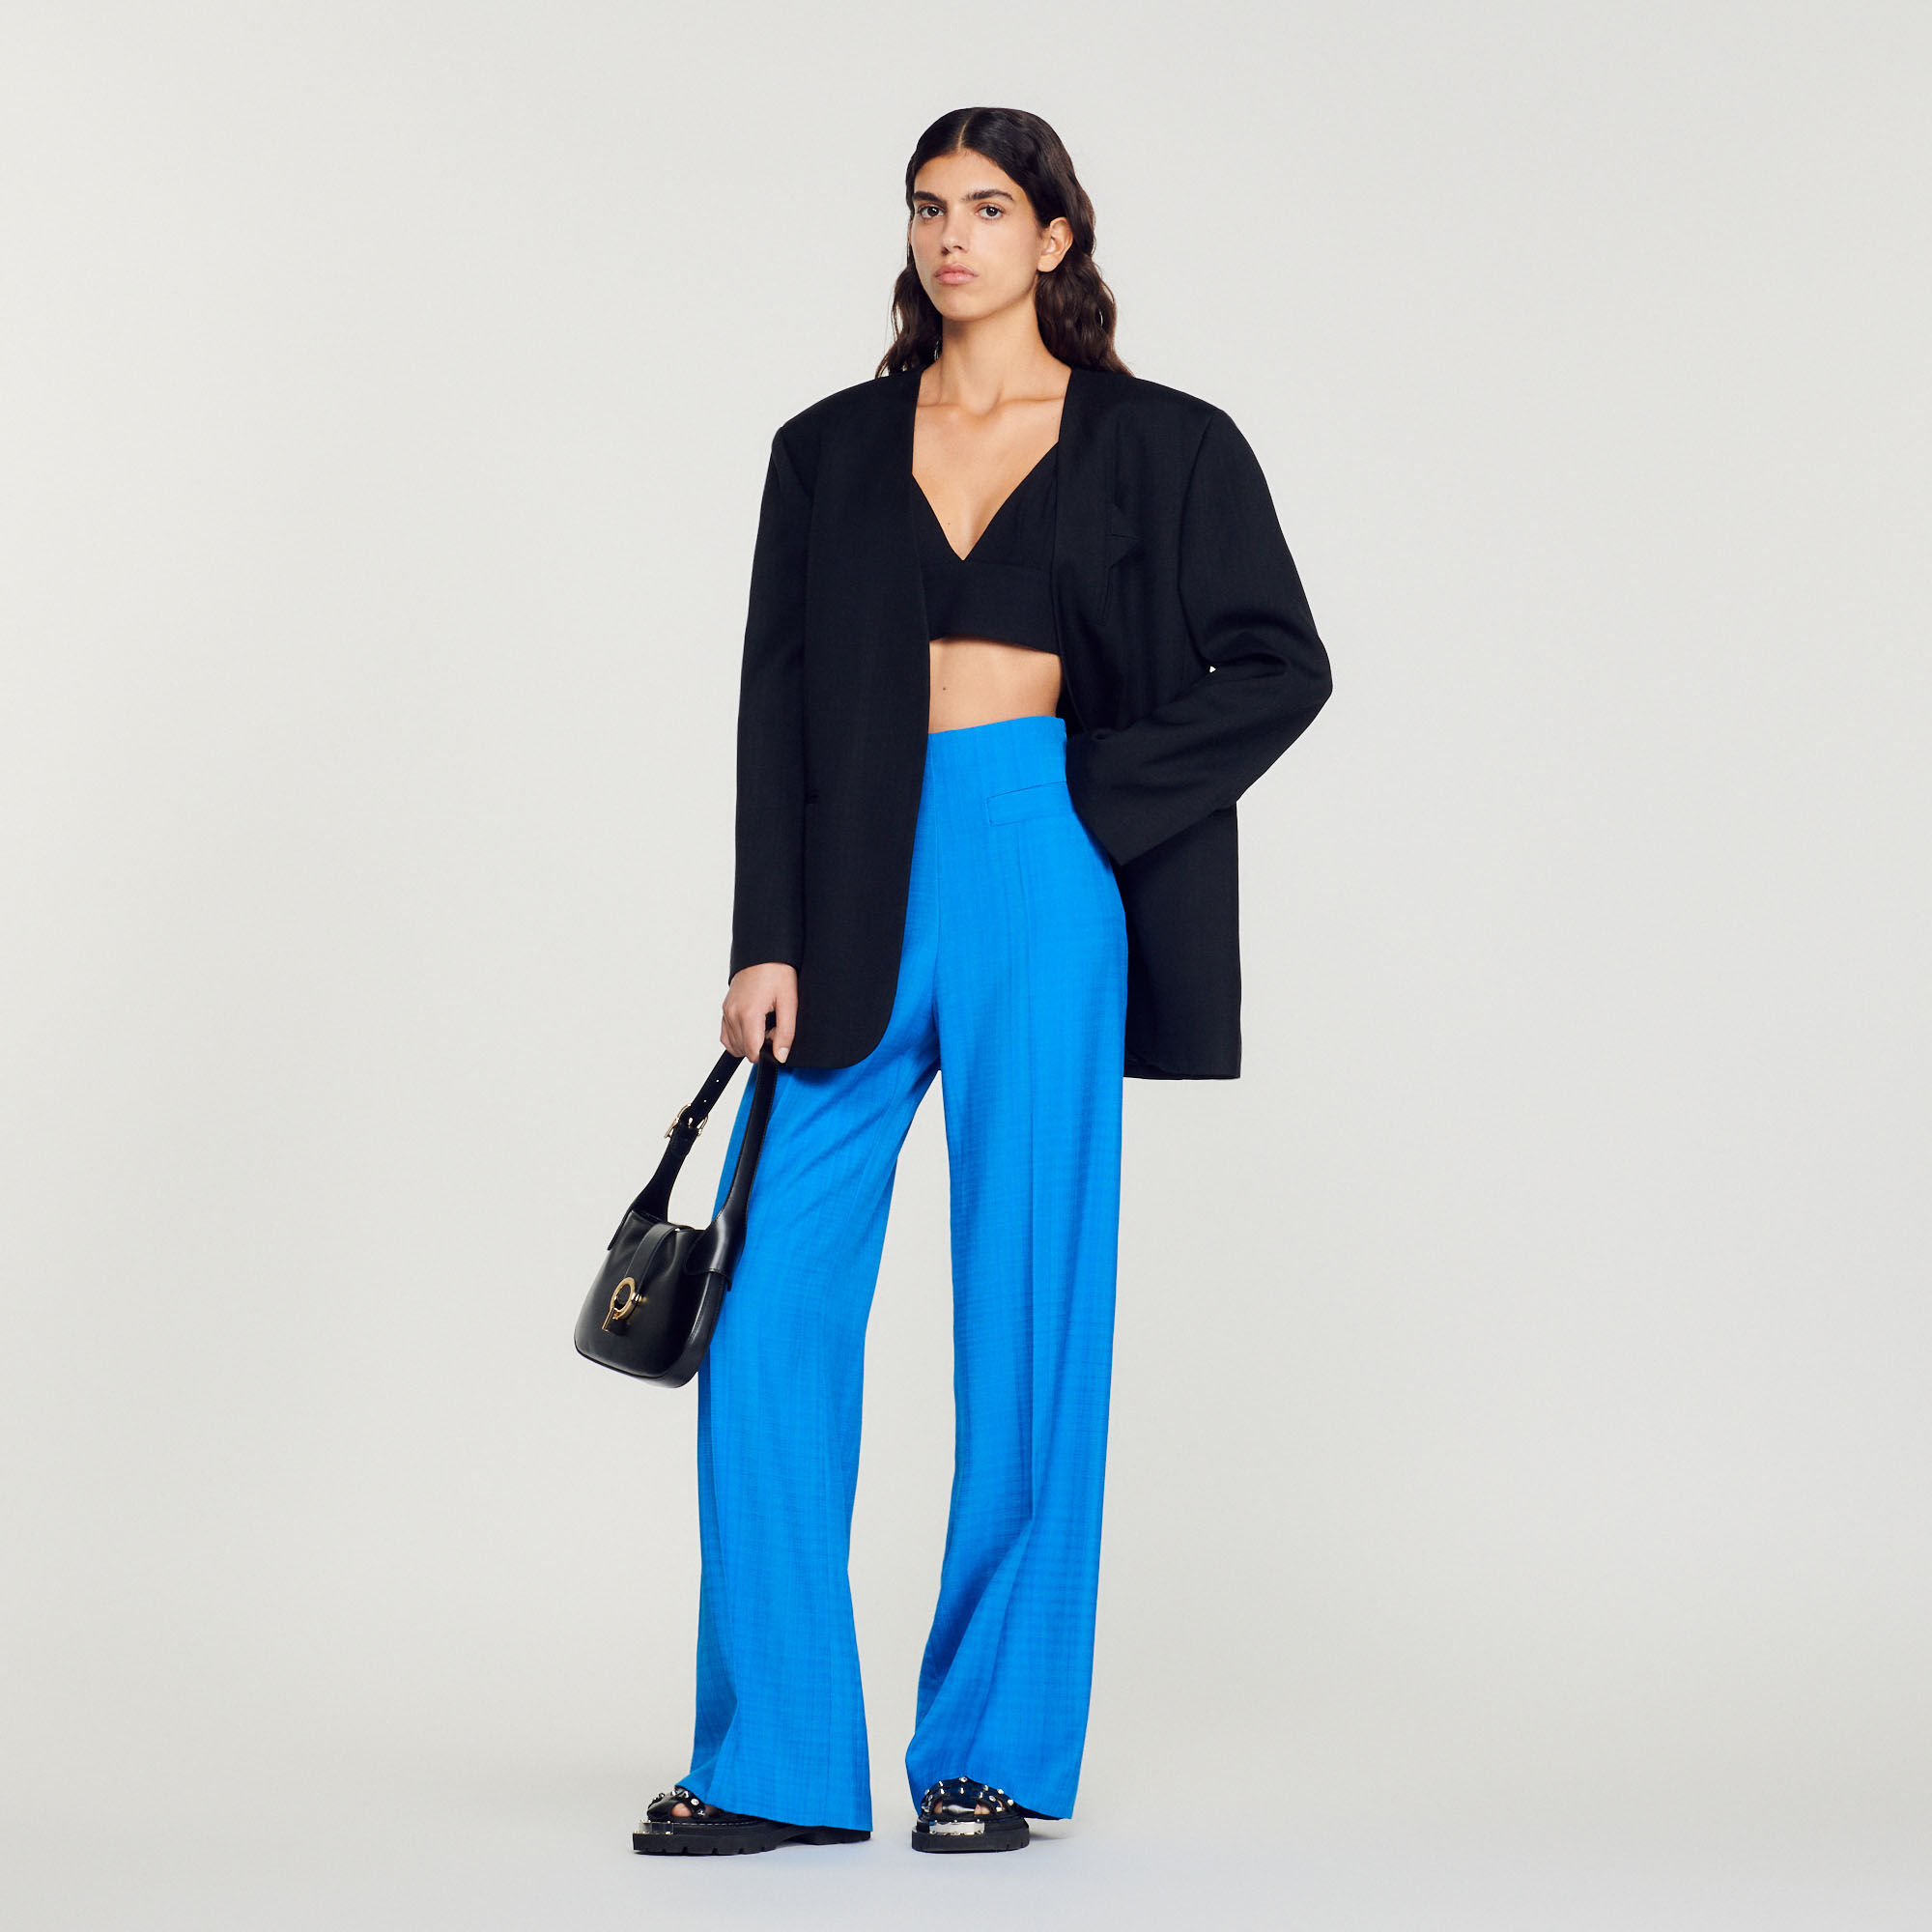 White High Waisted Side Zip Flare Trousers  Billie  Rebellious Fashion